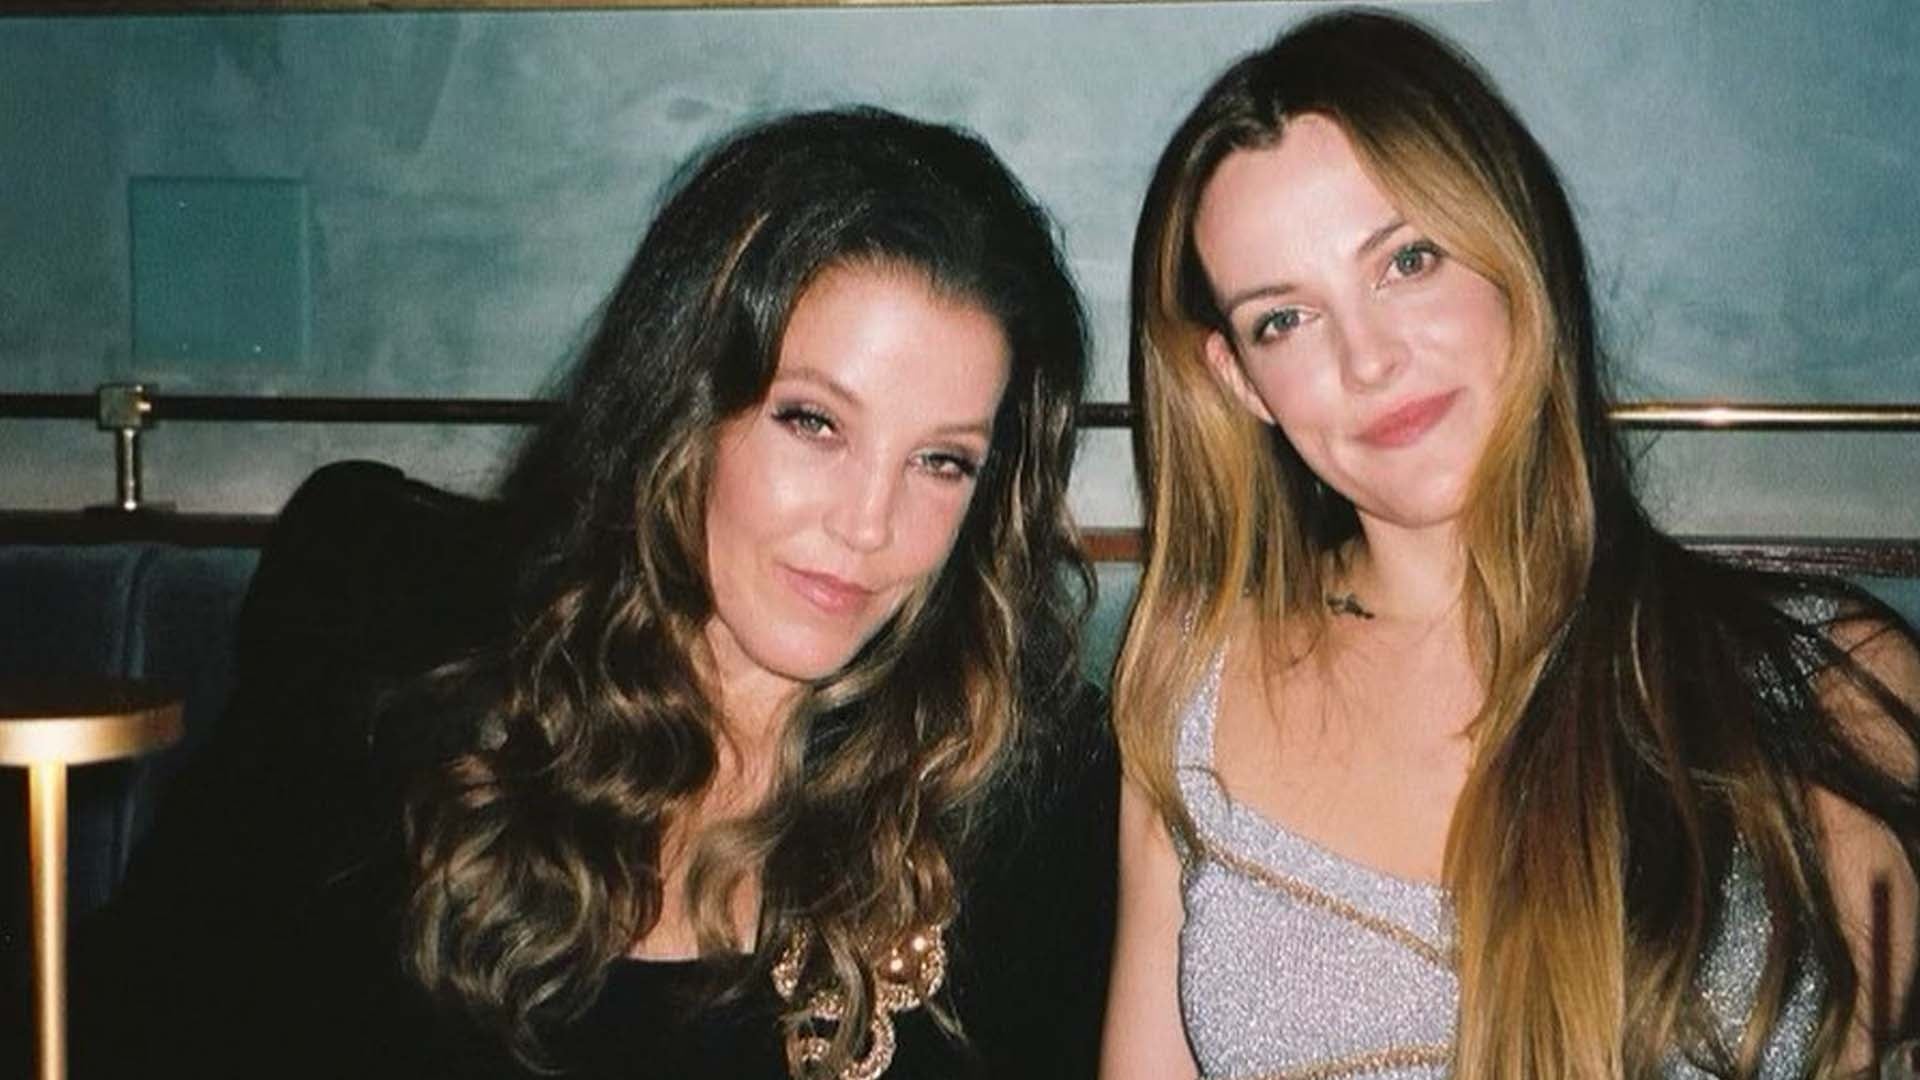 Riley Keough Shares Final Photo With Mom Lisa Marie Presley Before Her Death